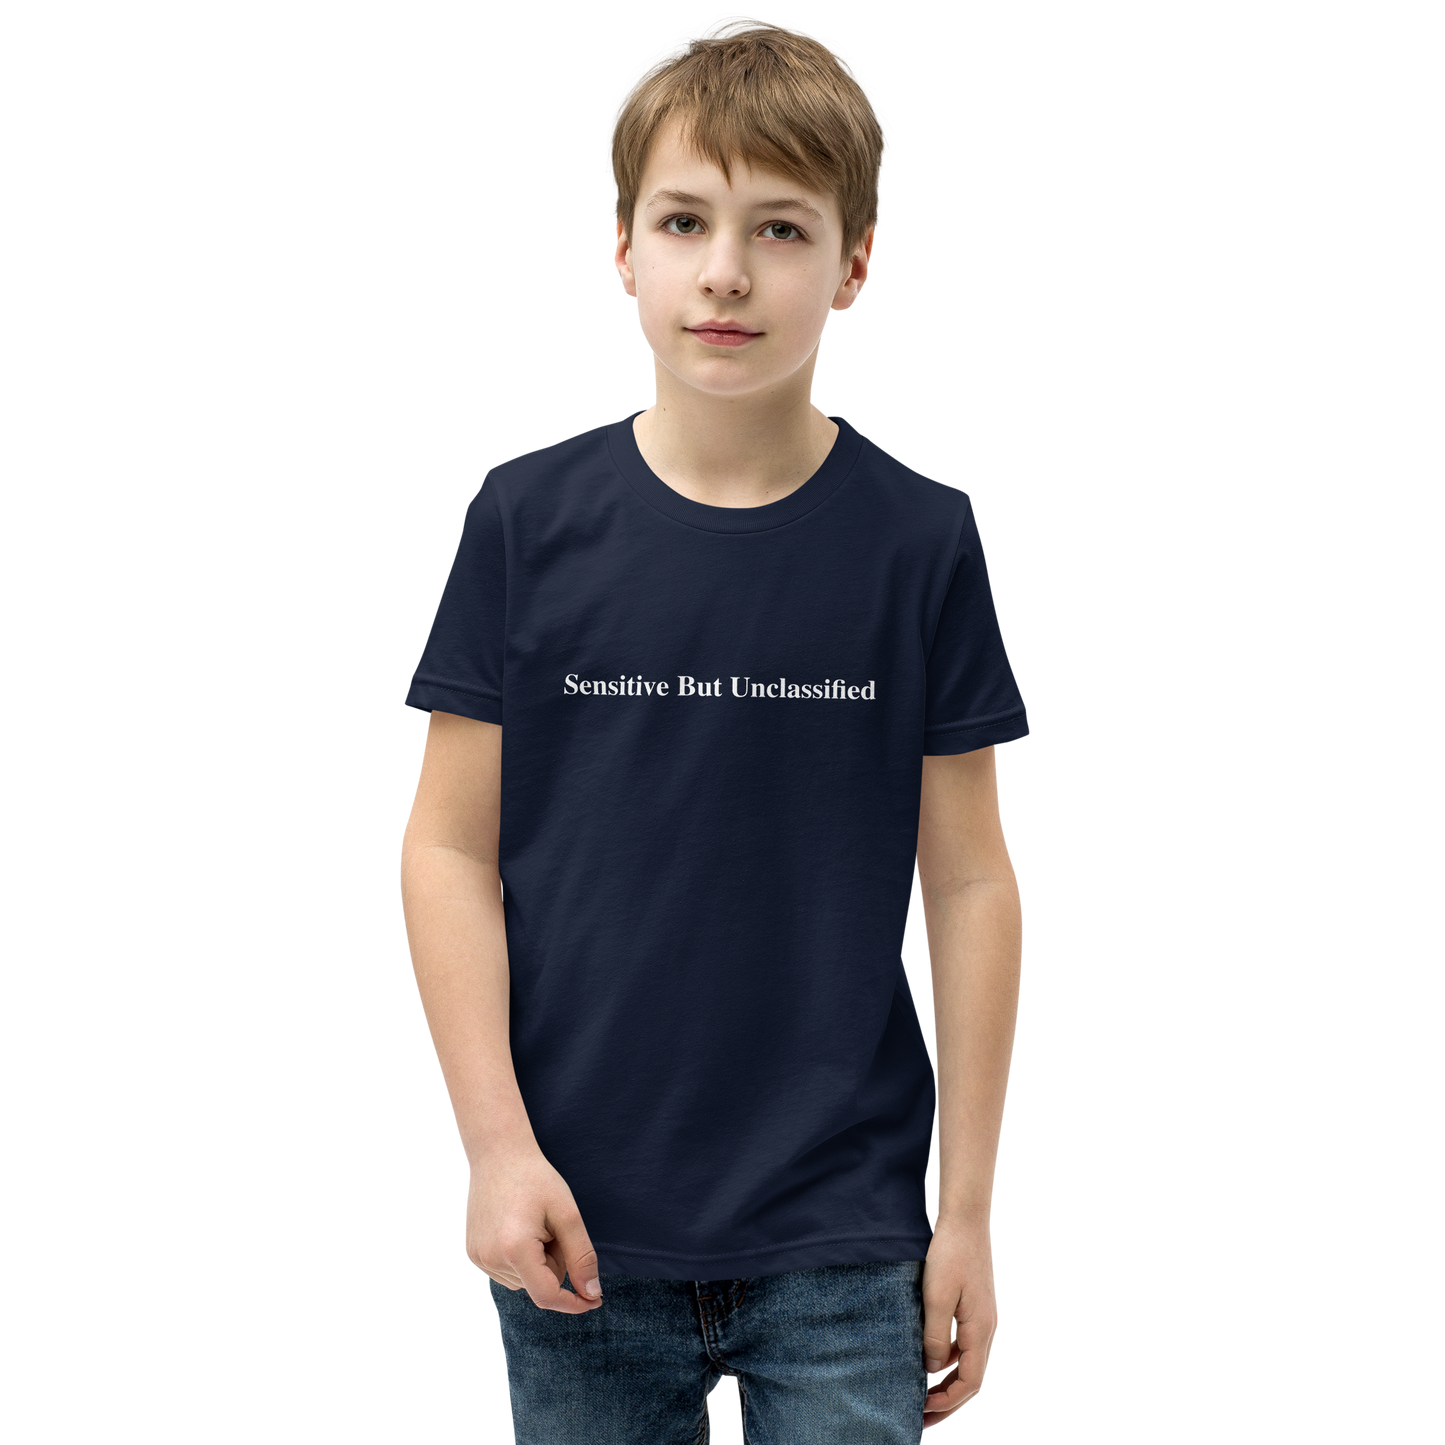 Sensitive But Unclassified youth T-shirt